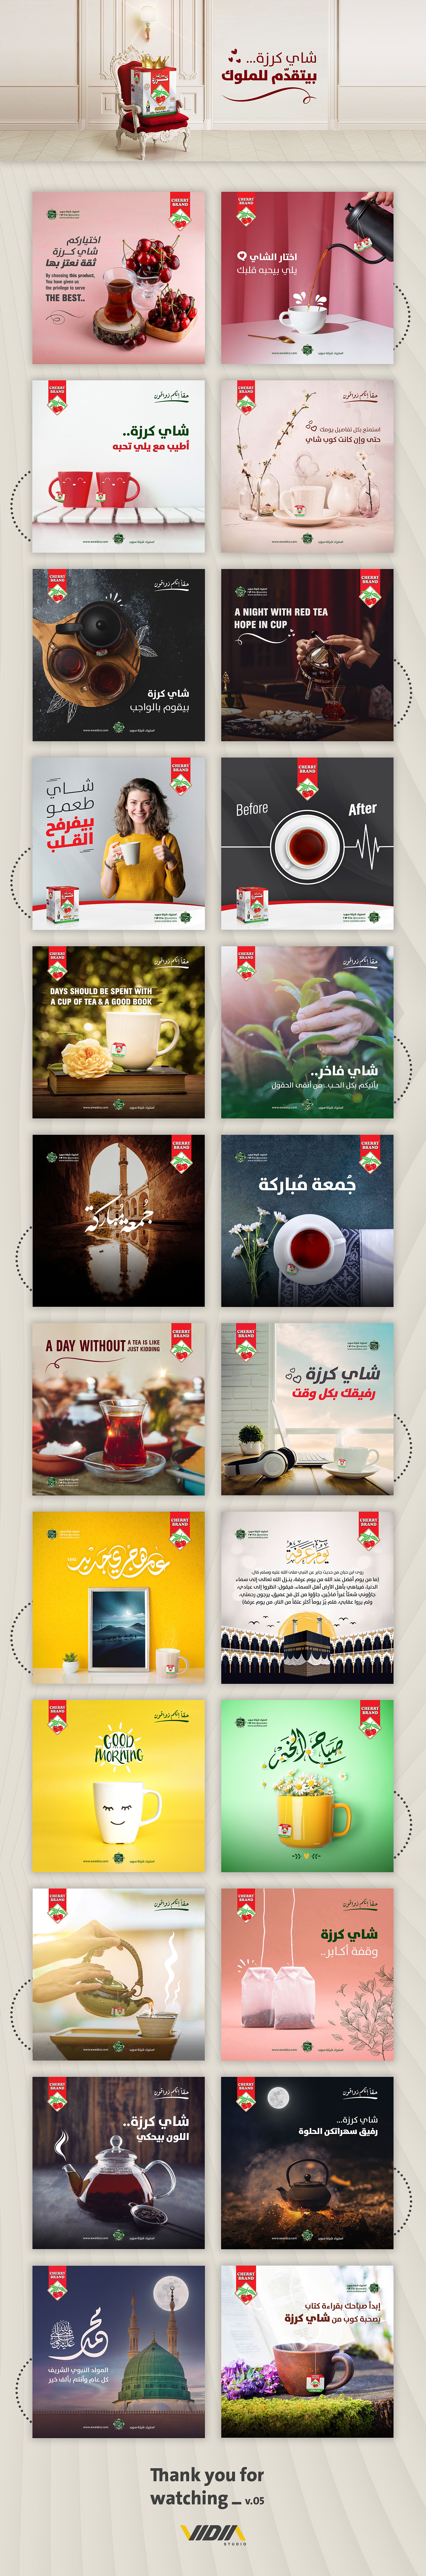 Advertising  drink products social media tea سوشيال ميديا شاي مشروبات graphic poster